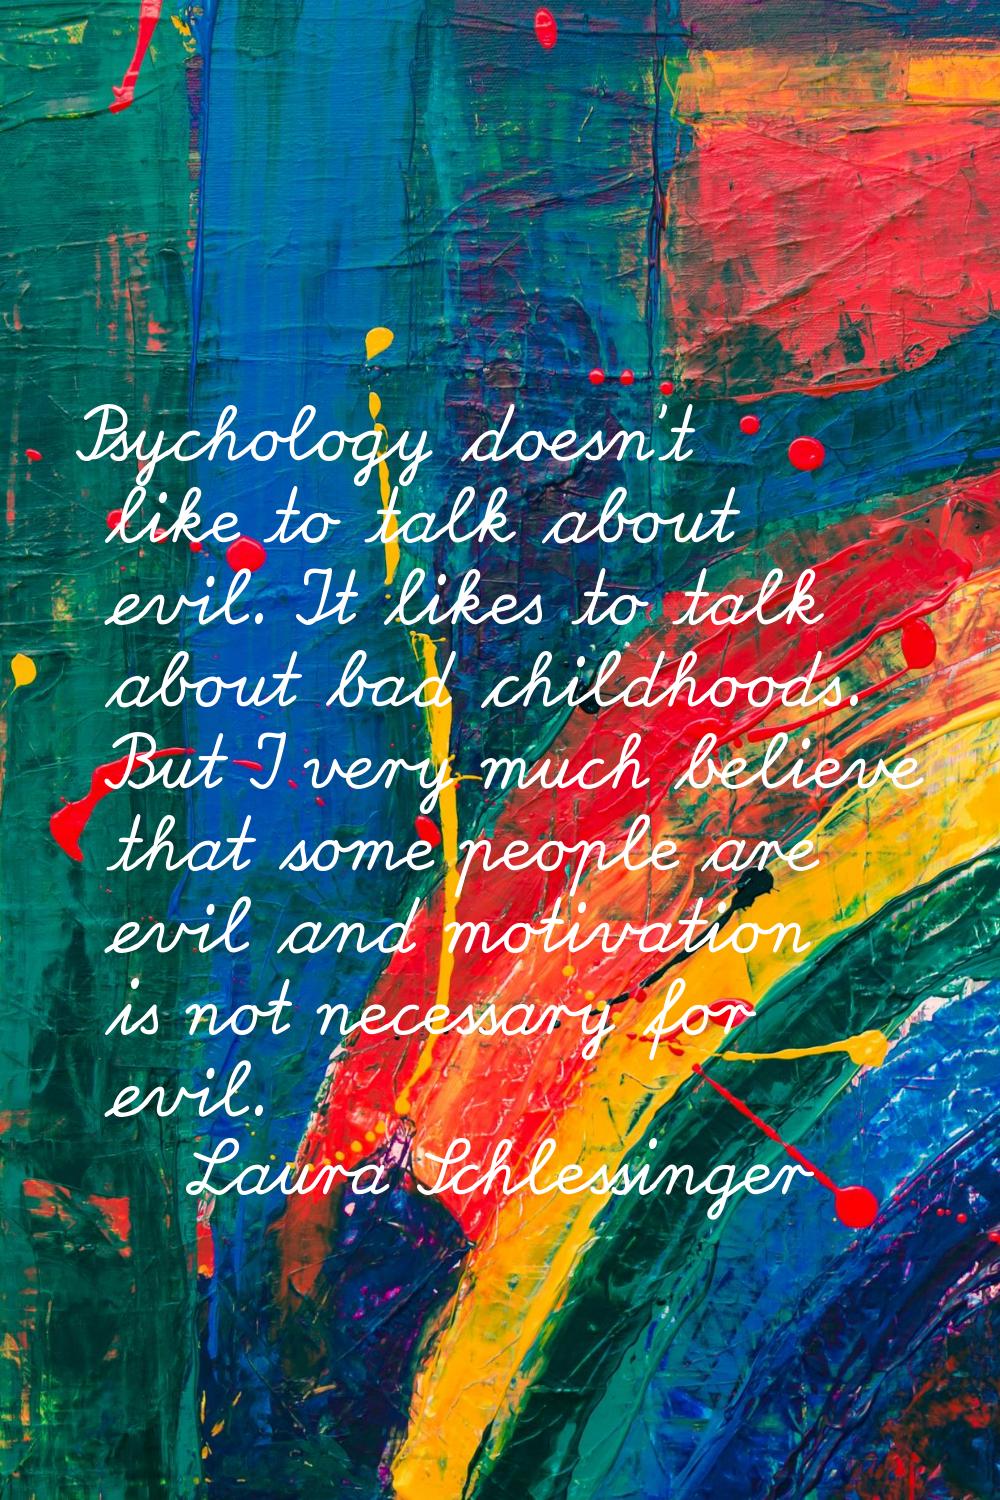 Psychology doesn't like to talk about evil. It likes to talk about bad childhoods. But I very much 